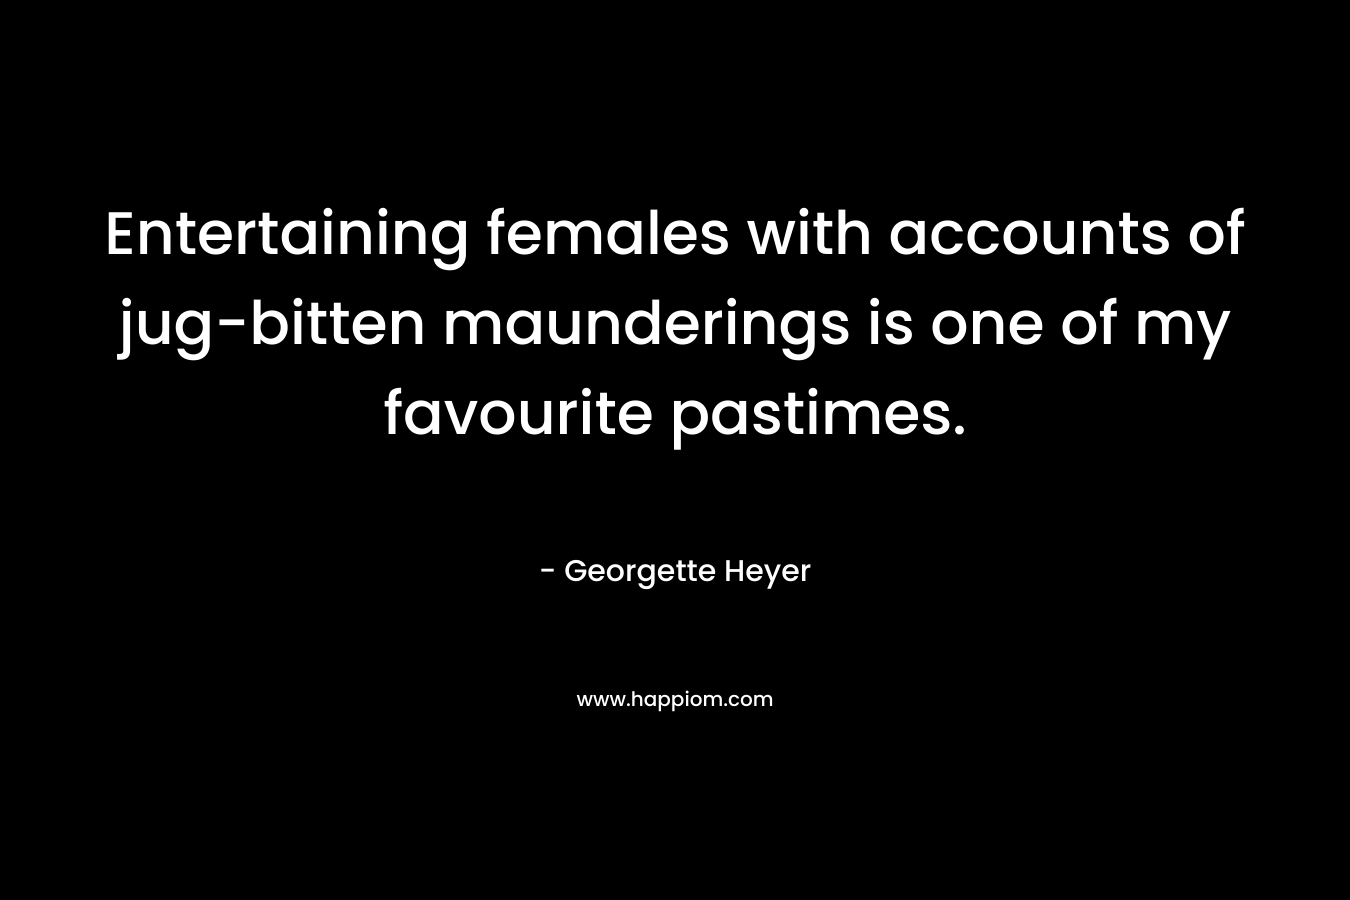 Entertaining females with accounts of jug-bitten maunderings is one of my favourite pastimes.